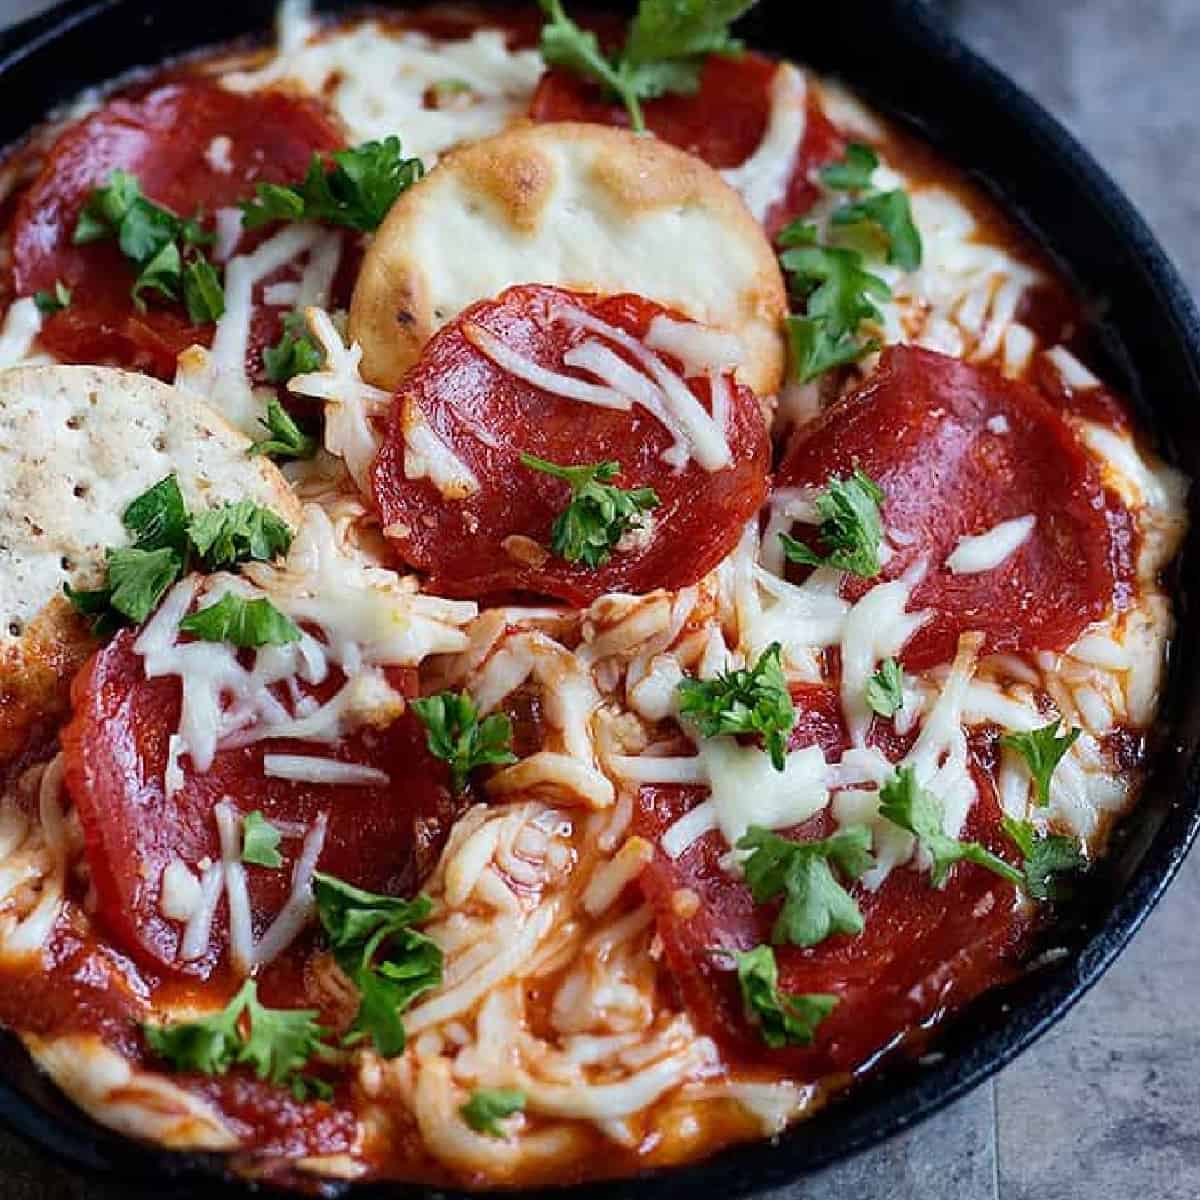 This Pizza Dip is the perfect game day food. Creamy dip topped with pepperoni has tons of flavor in every bite and is a great choice for parties and gatherings!
